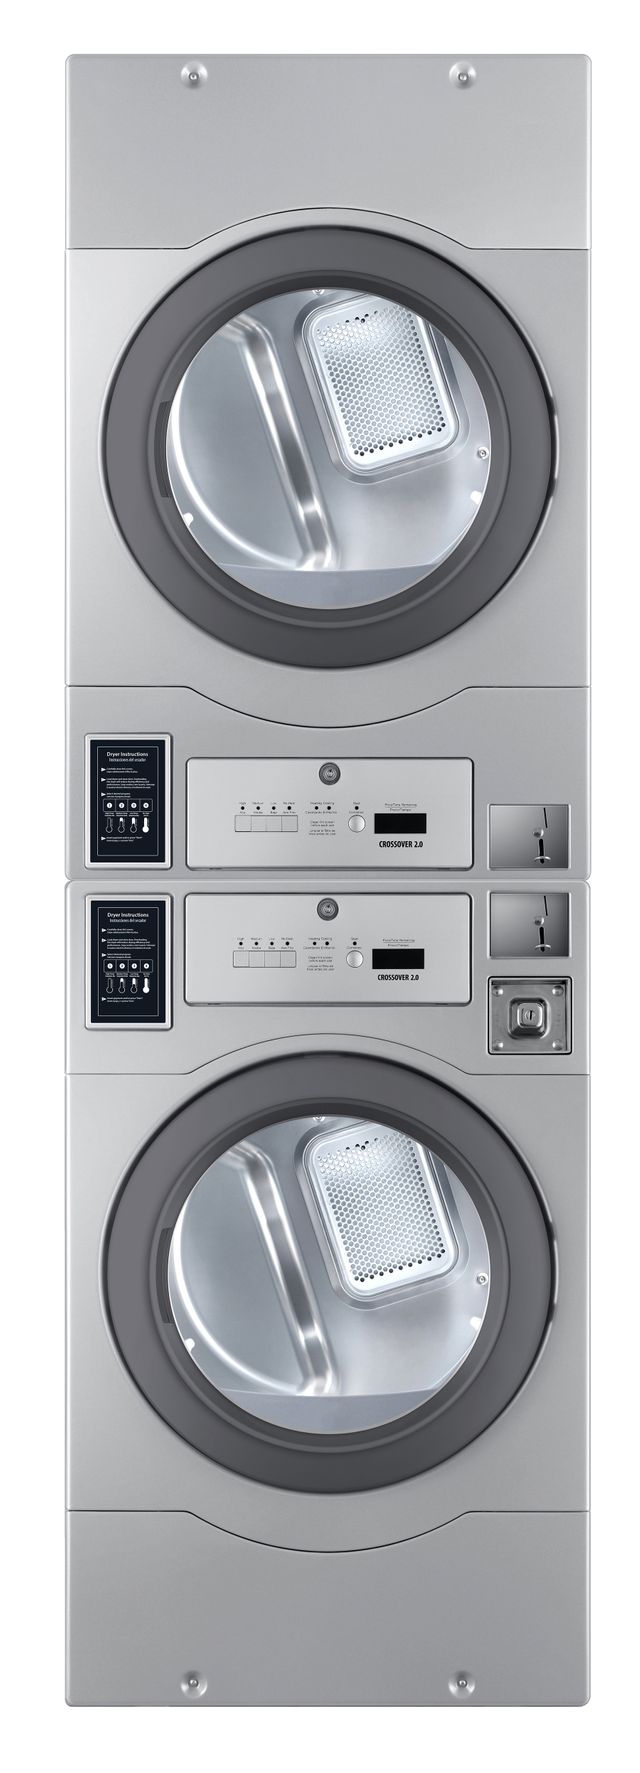 Crossover True Commercial Laundry - 7.0 Cu. Ft. Silver Heavy Duty Bottom Control Gas Dryer with Coin Option/Card Ready Included (Stacked application) 2